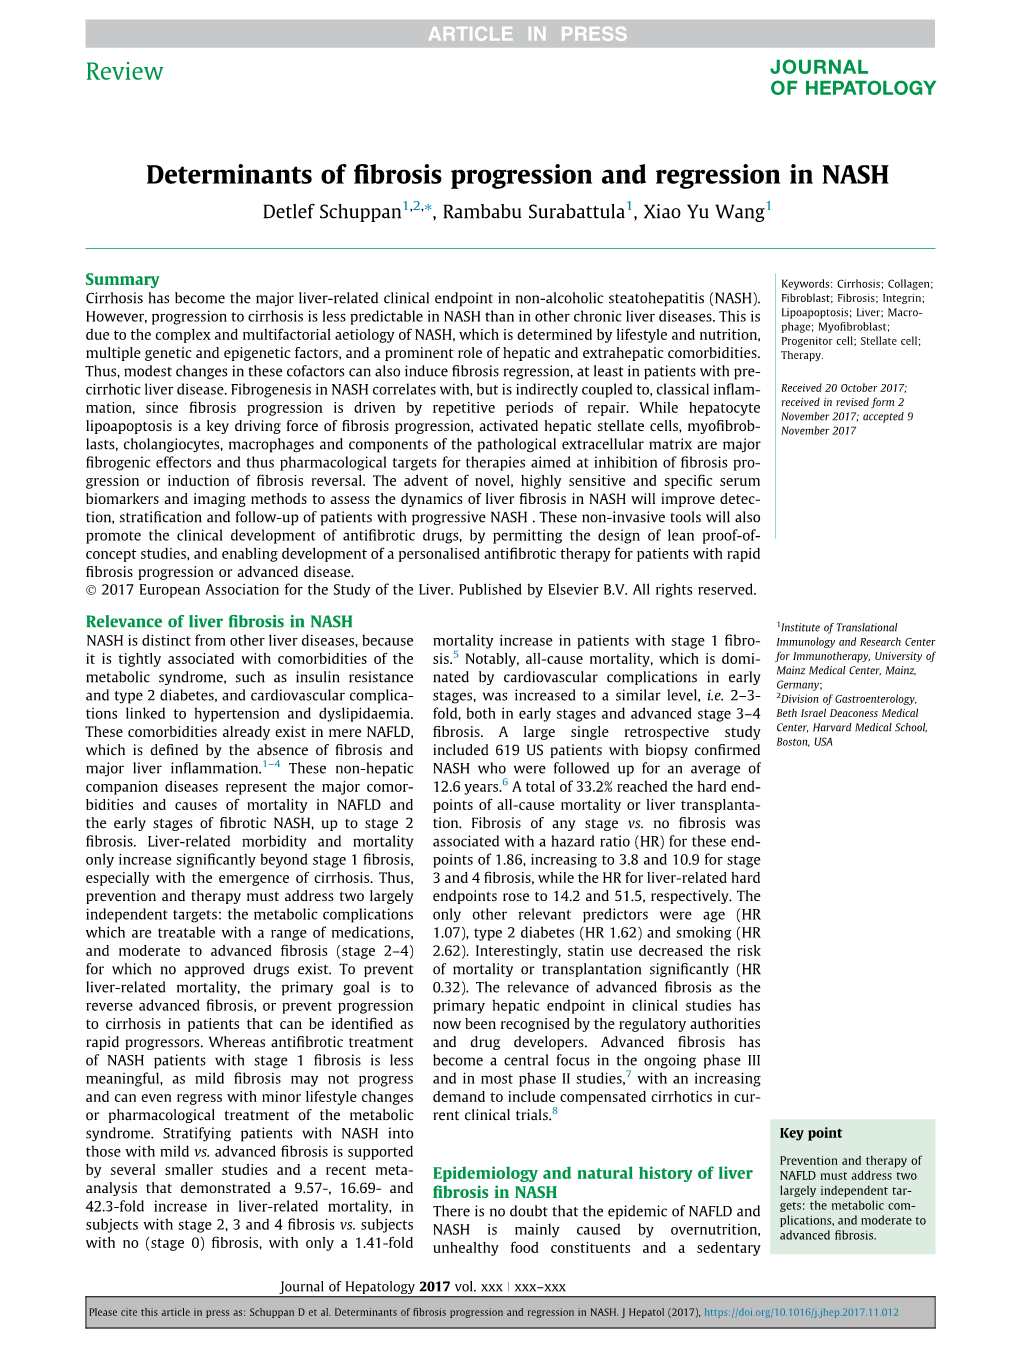 Determinants of Fibrosis Progression and Regression in NASH